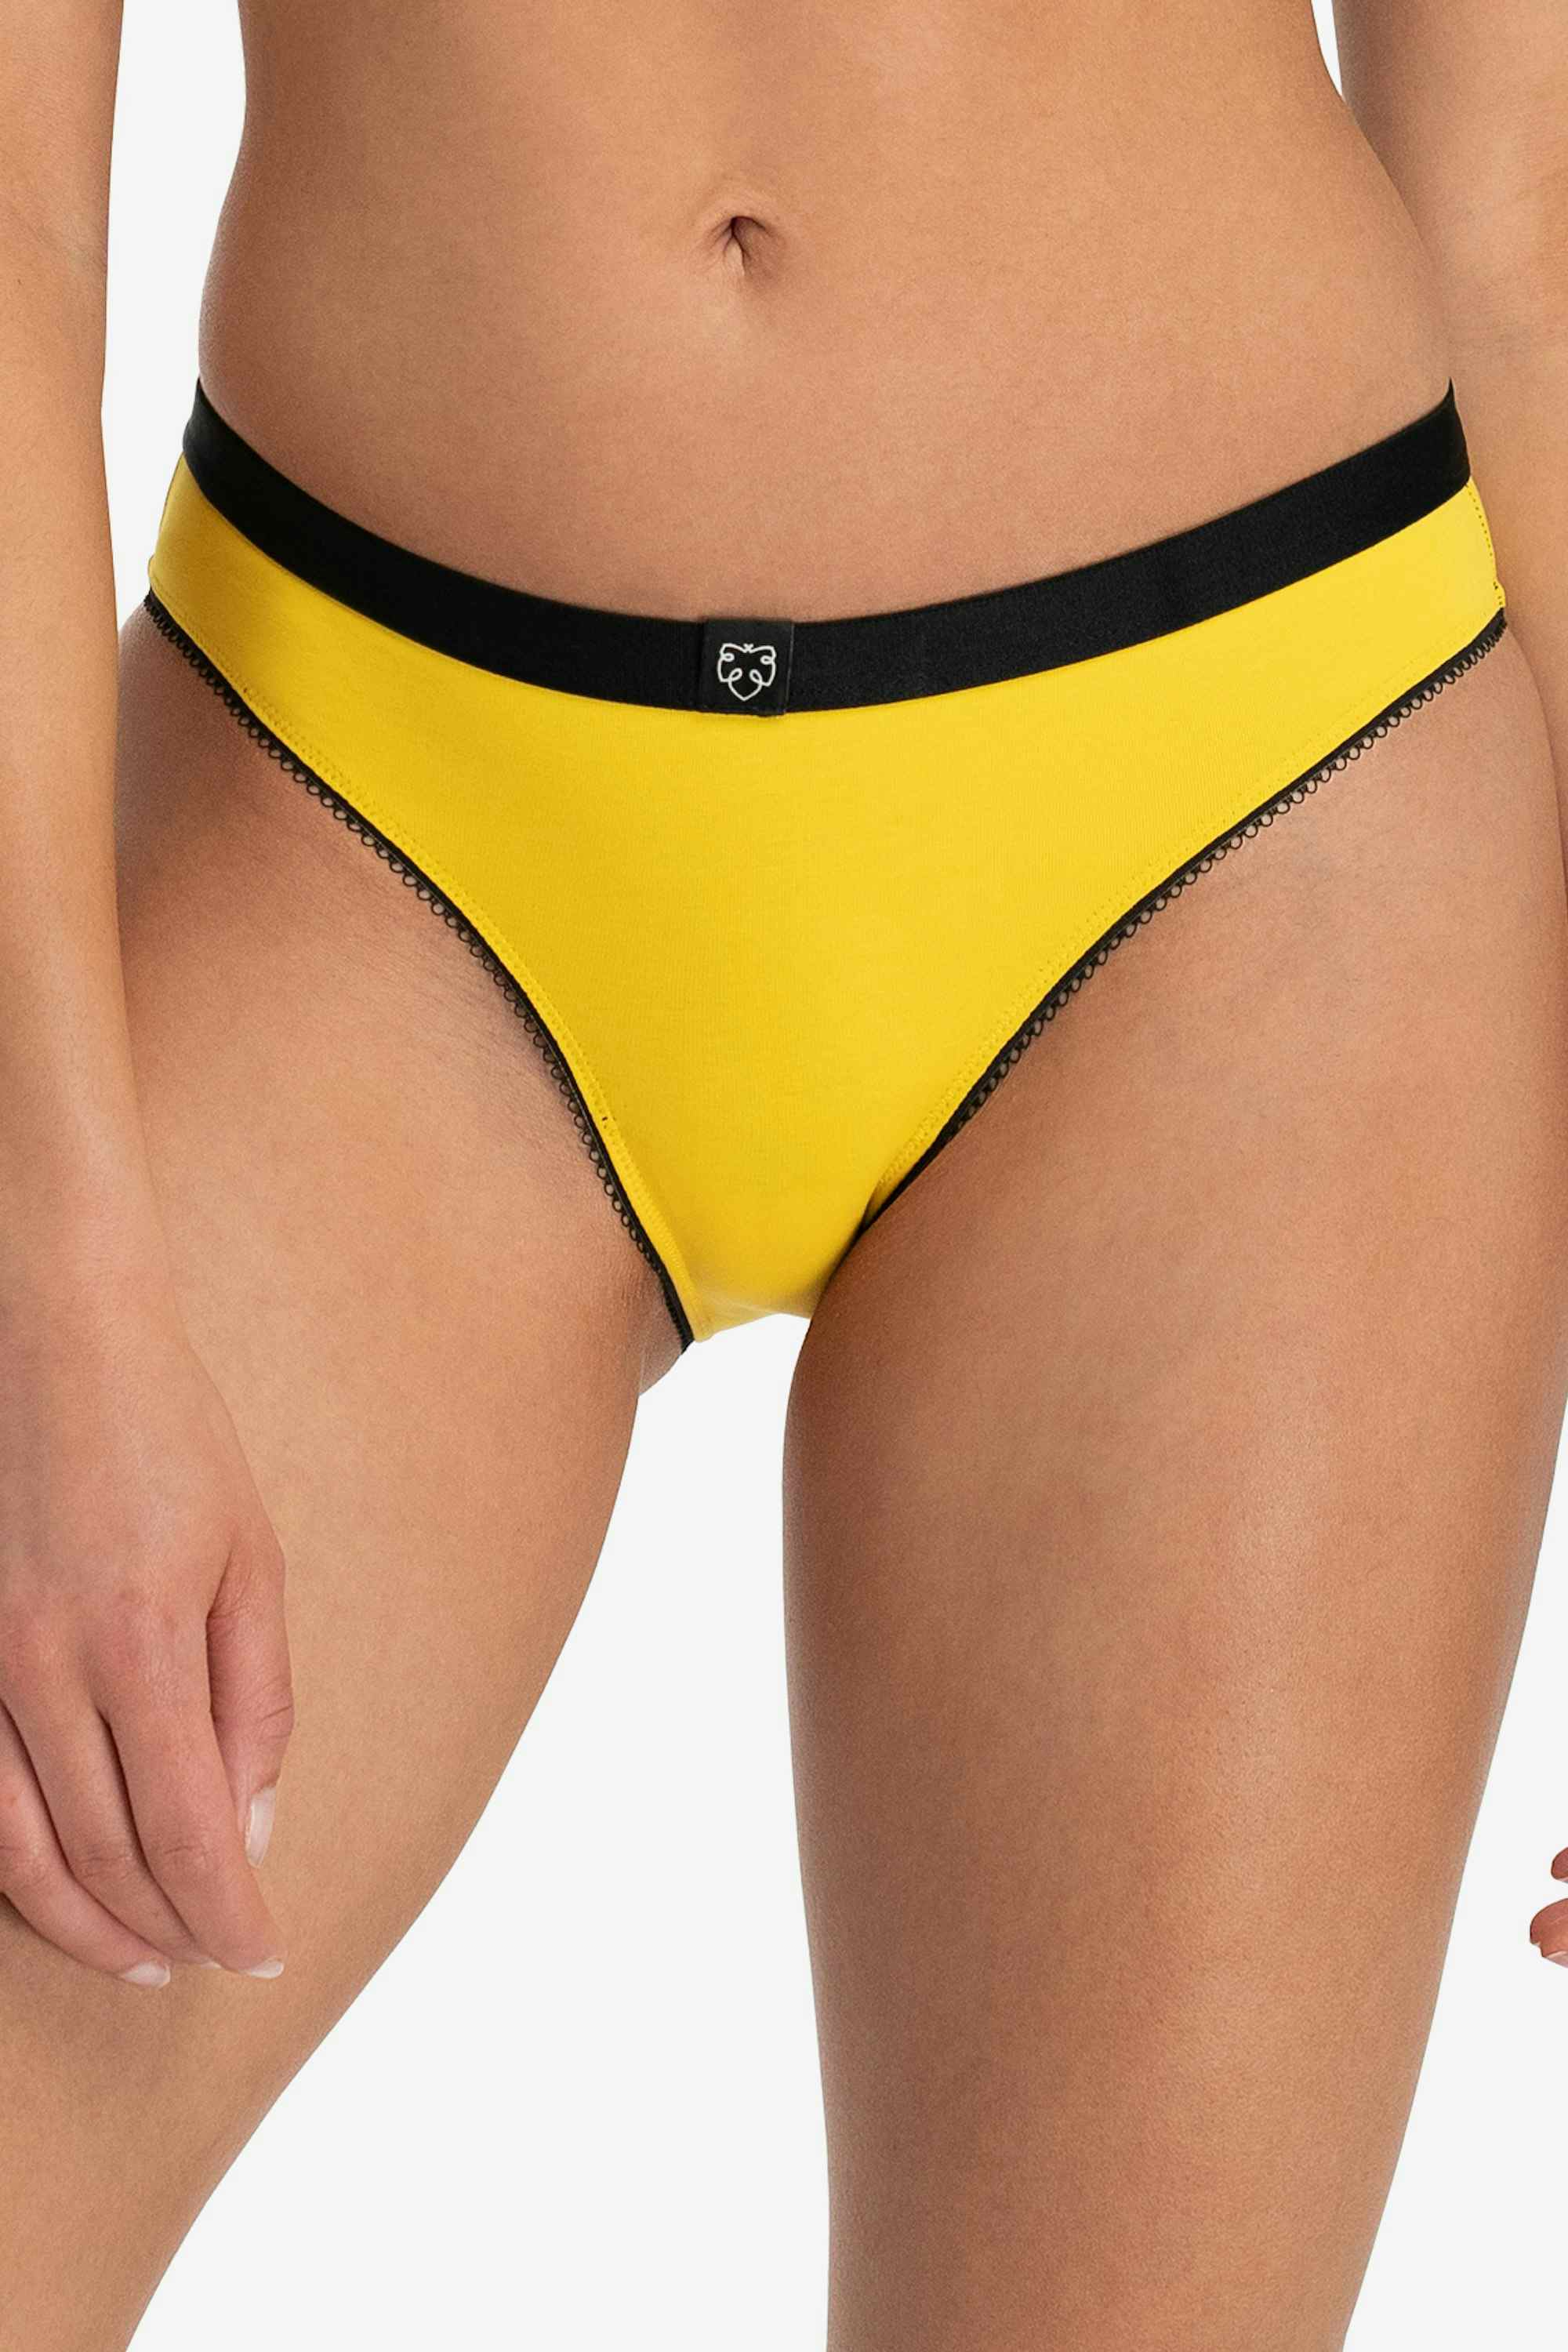 A-dam women's solid yellow brief from GOTS pure organic cotton